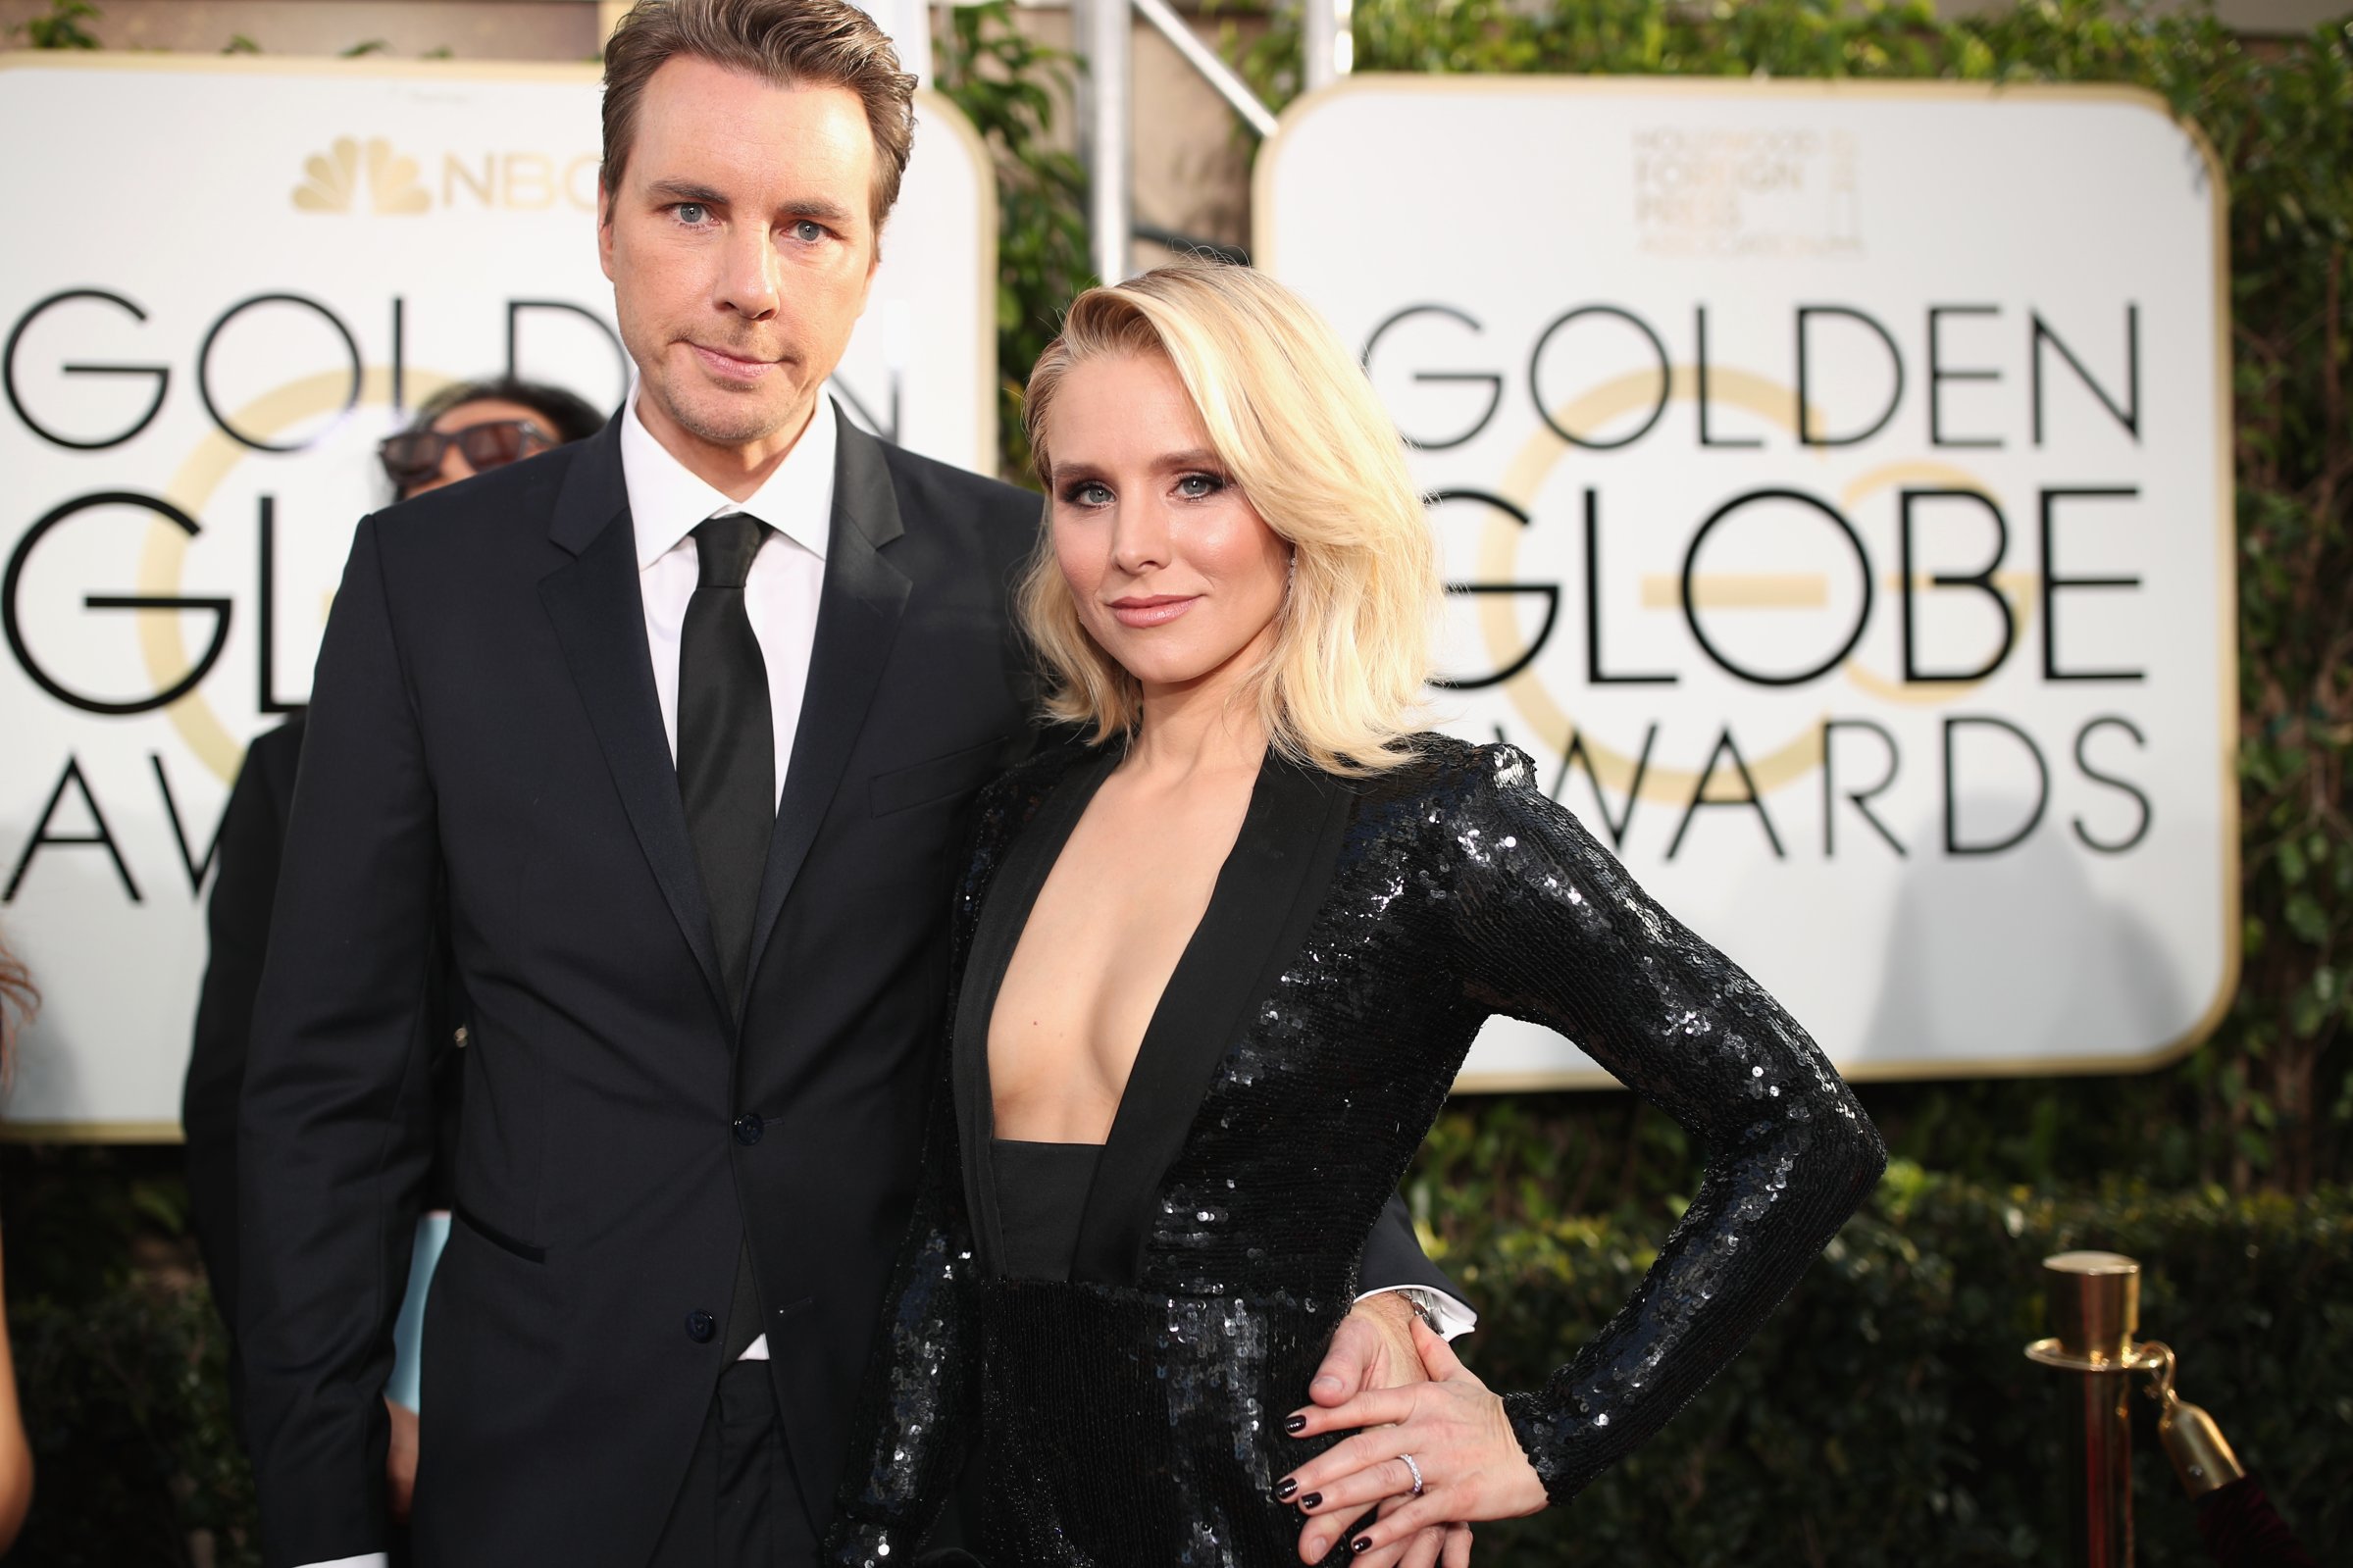 Actors Dax Shepard and Kristen Bell arrive to the 74th Annual Golden Globe Awards held at the Beverly Hilton Hotel on January 8, 2017.